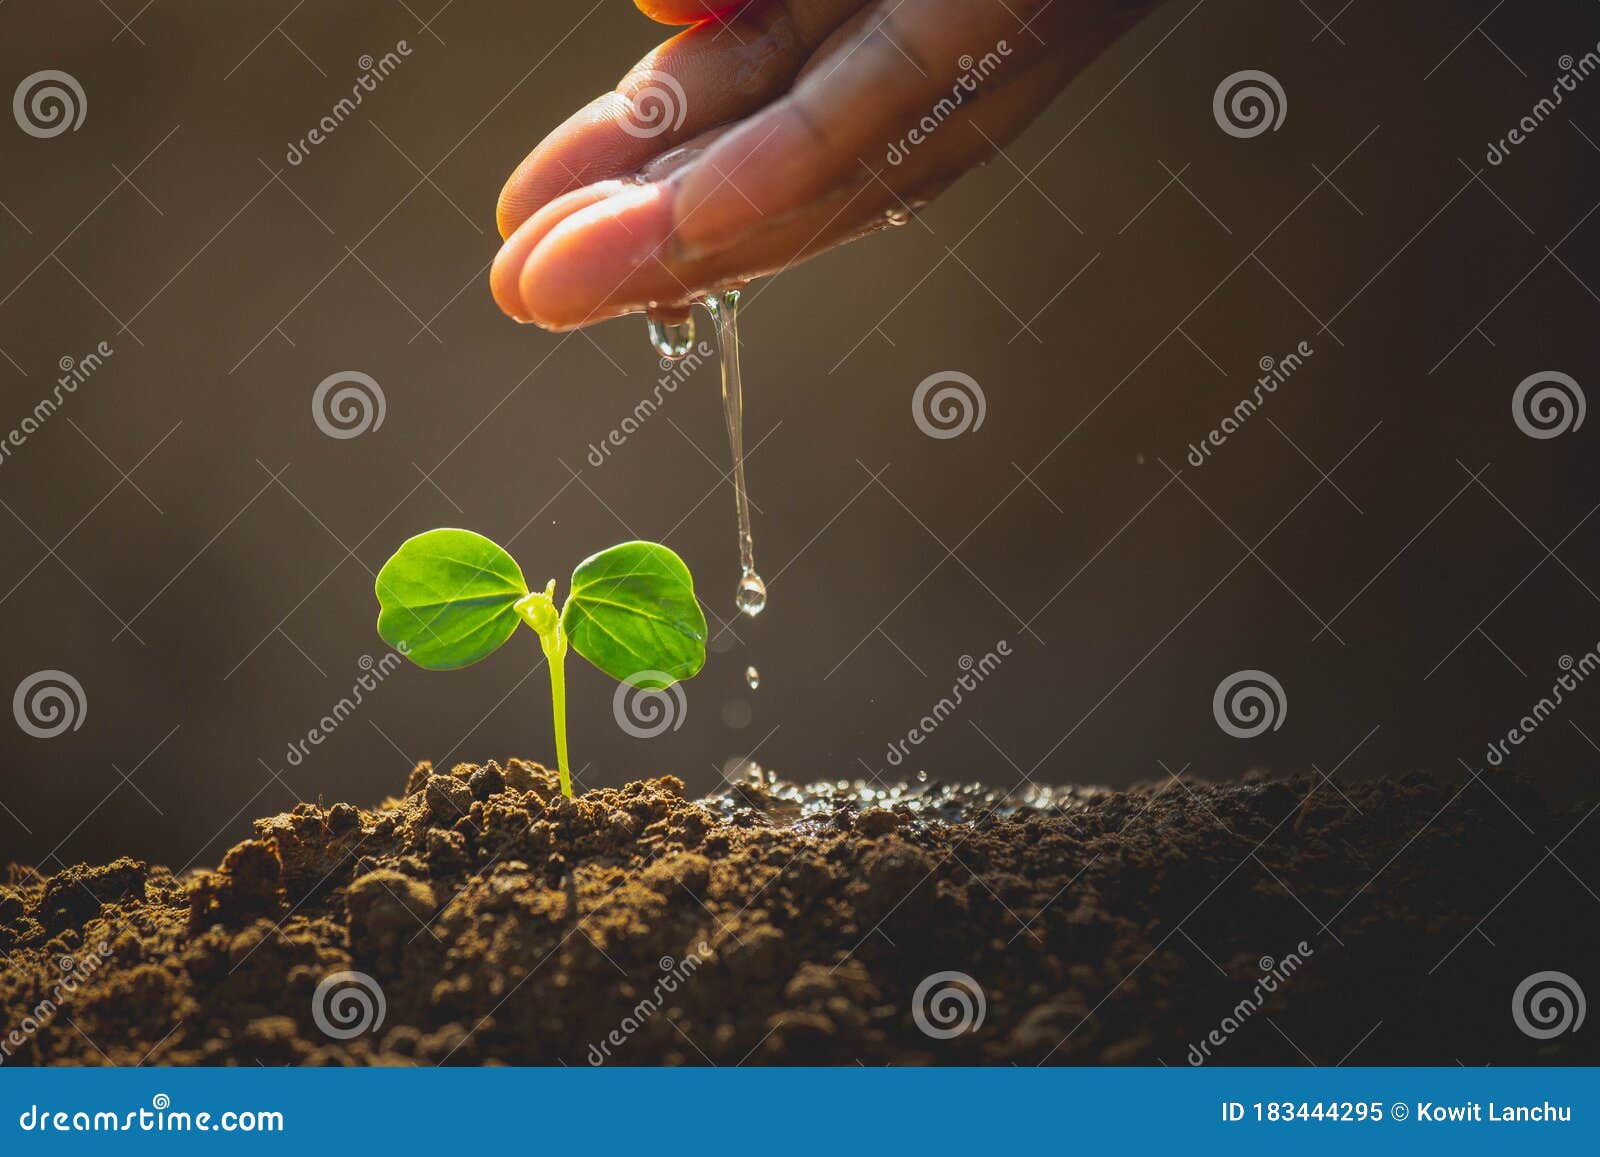 earth day concept. drop water on hand for growing tree. protect the environment.